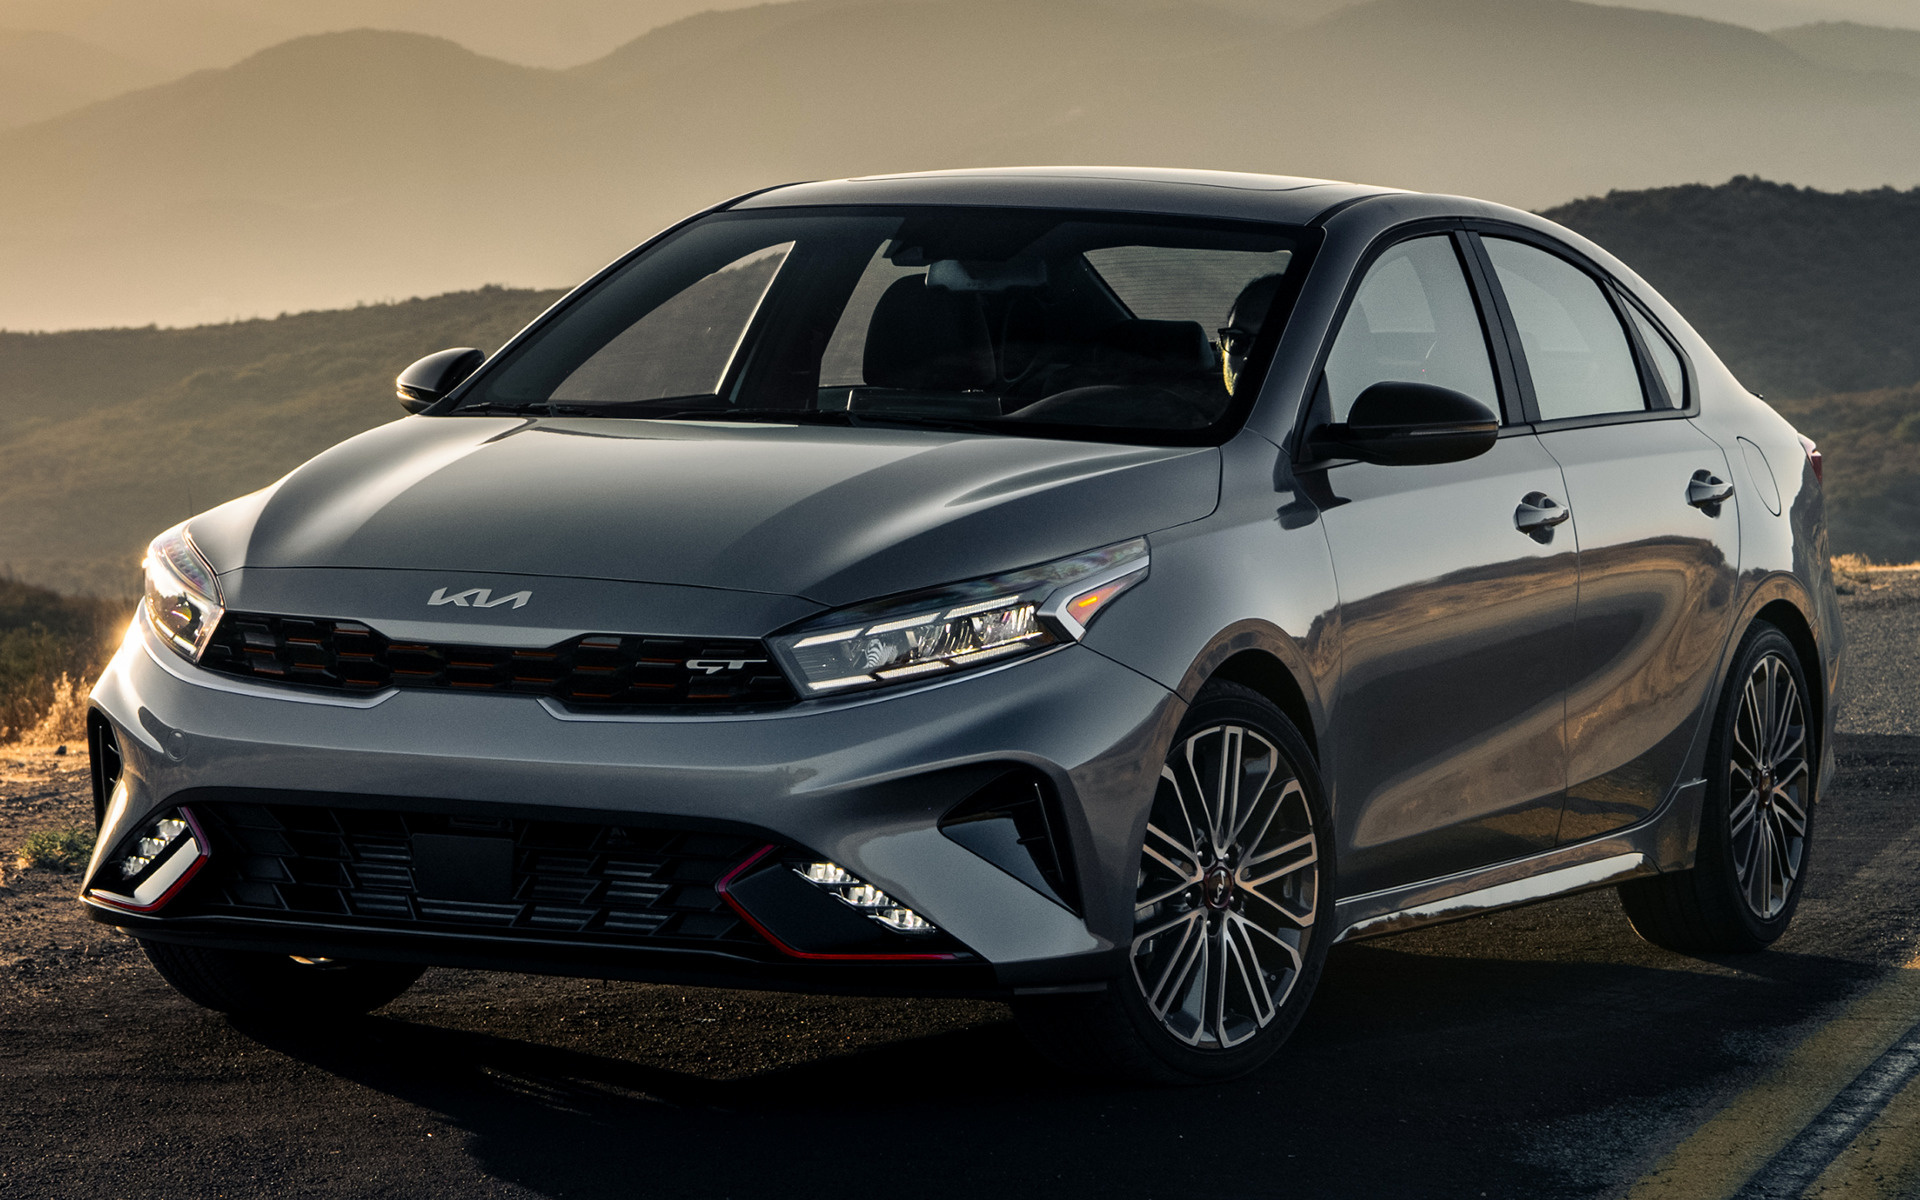 Kia Forte GT, Impressive wallpapers, Sporty and stylish, High-definition images, 1920x1200 HD Desktop